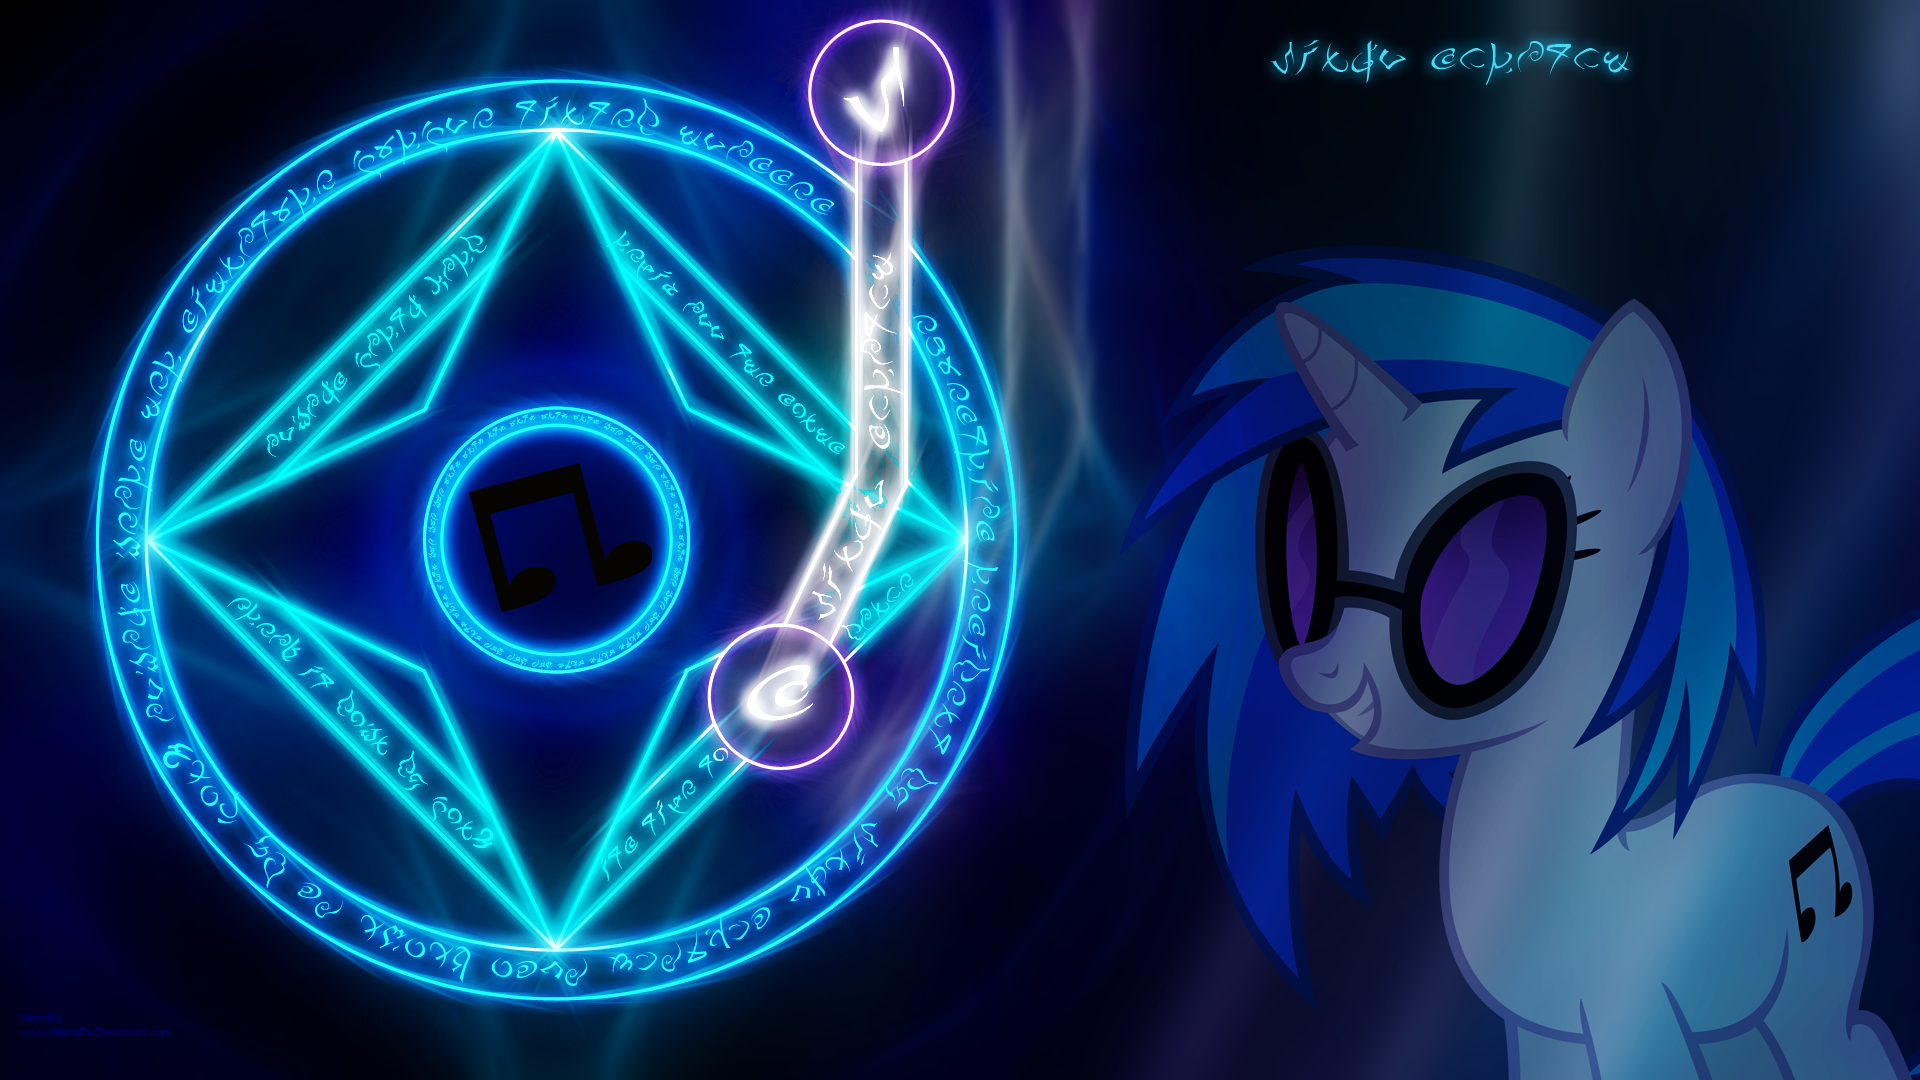 Arcane Vinyl Scratch by MoongazePonies, SierraEx and The-Smiling-Pony